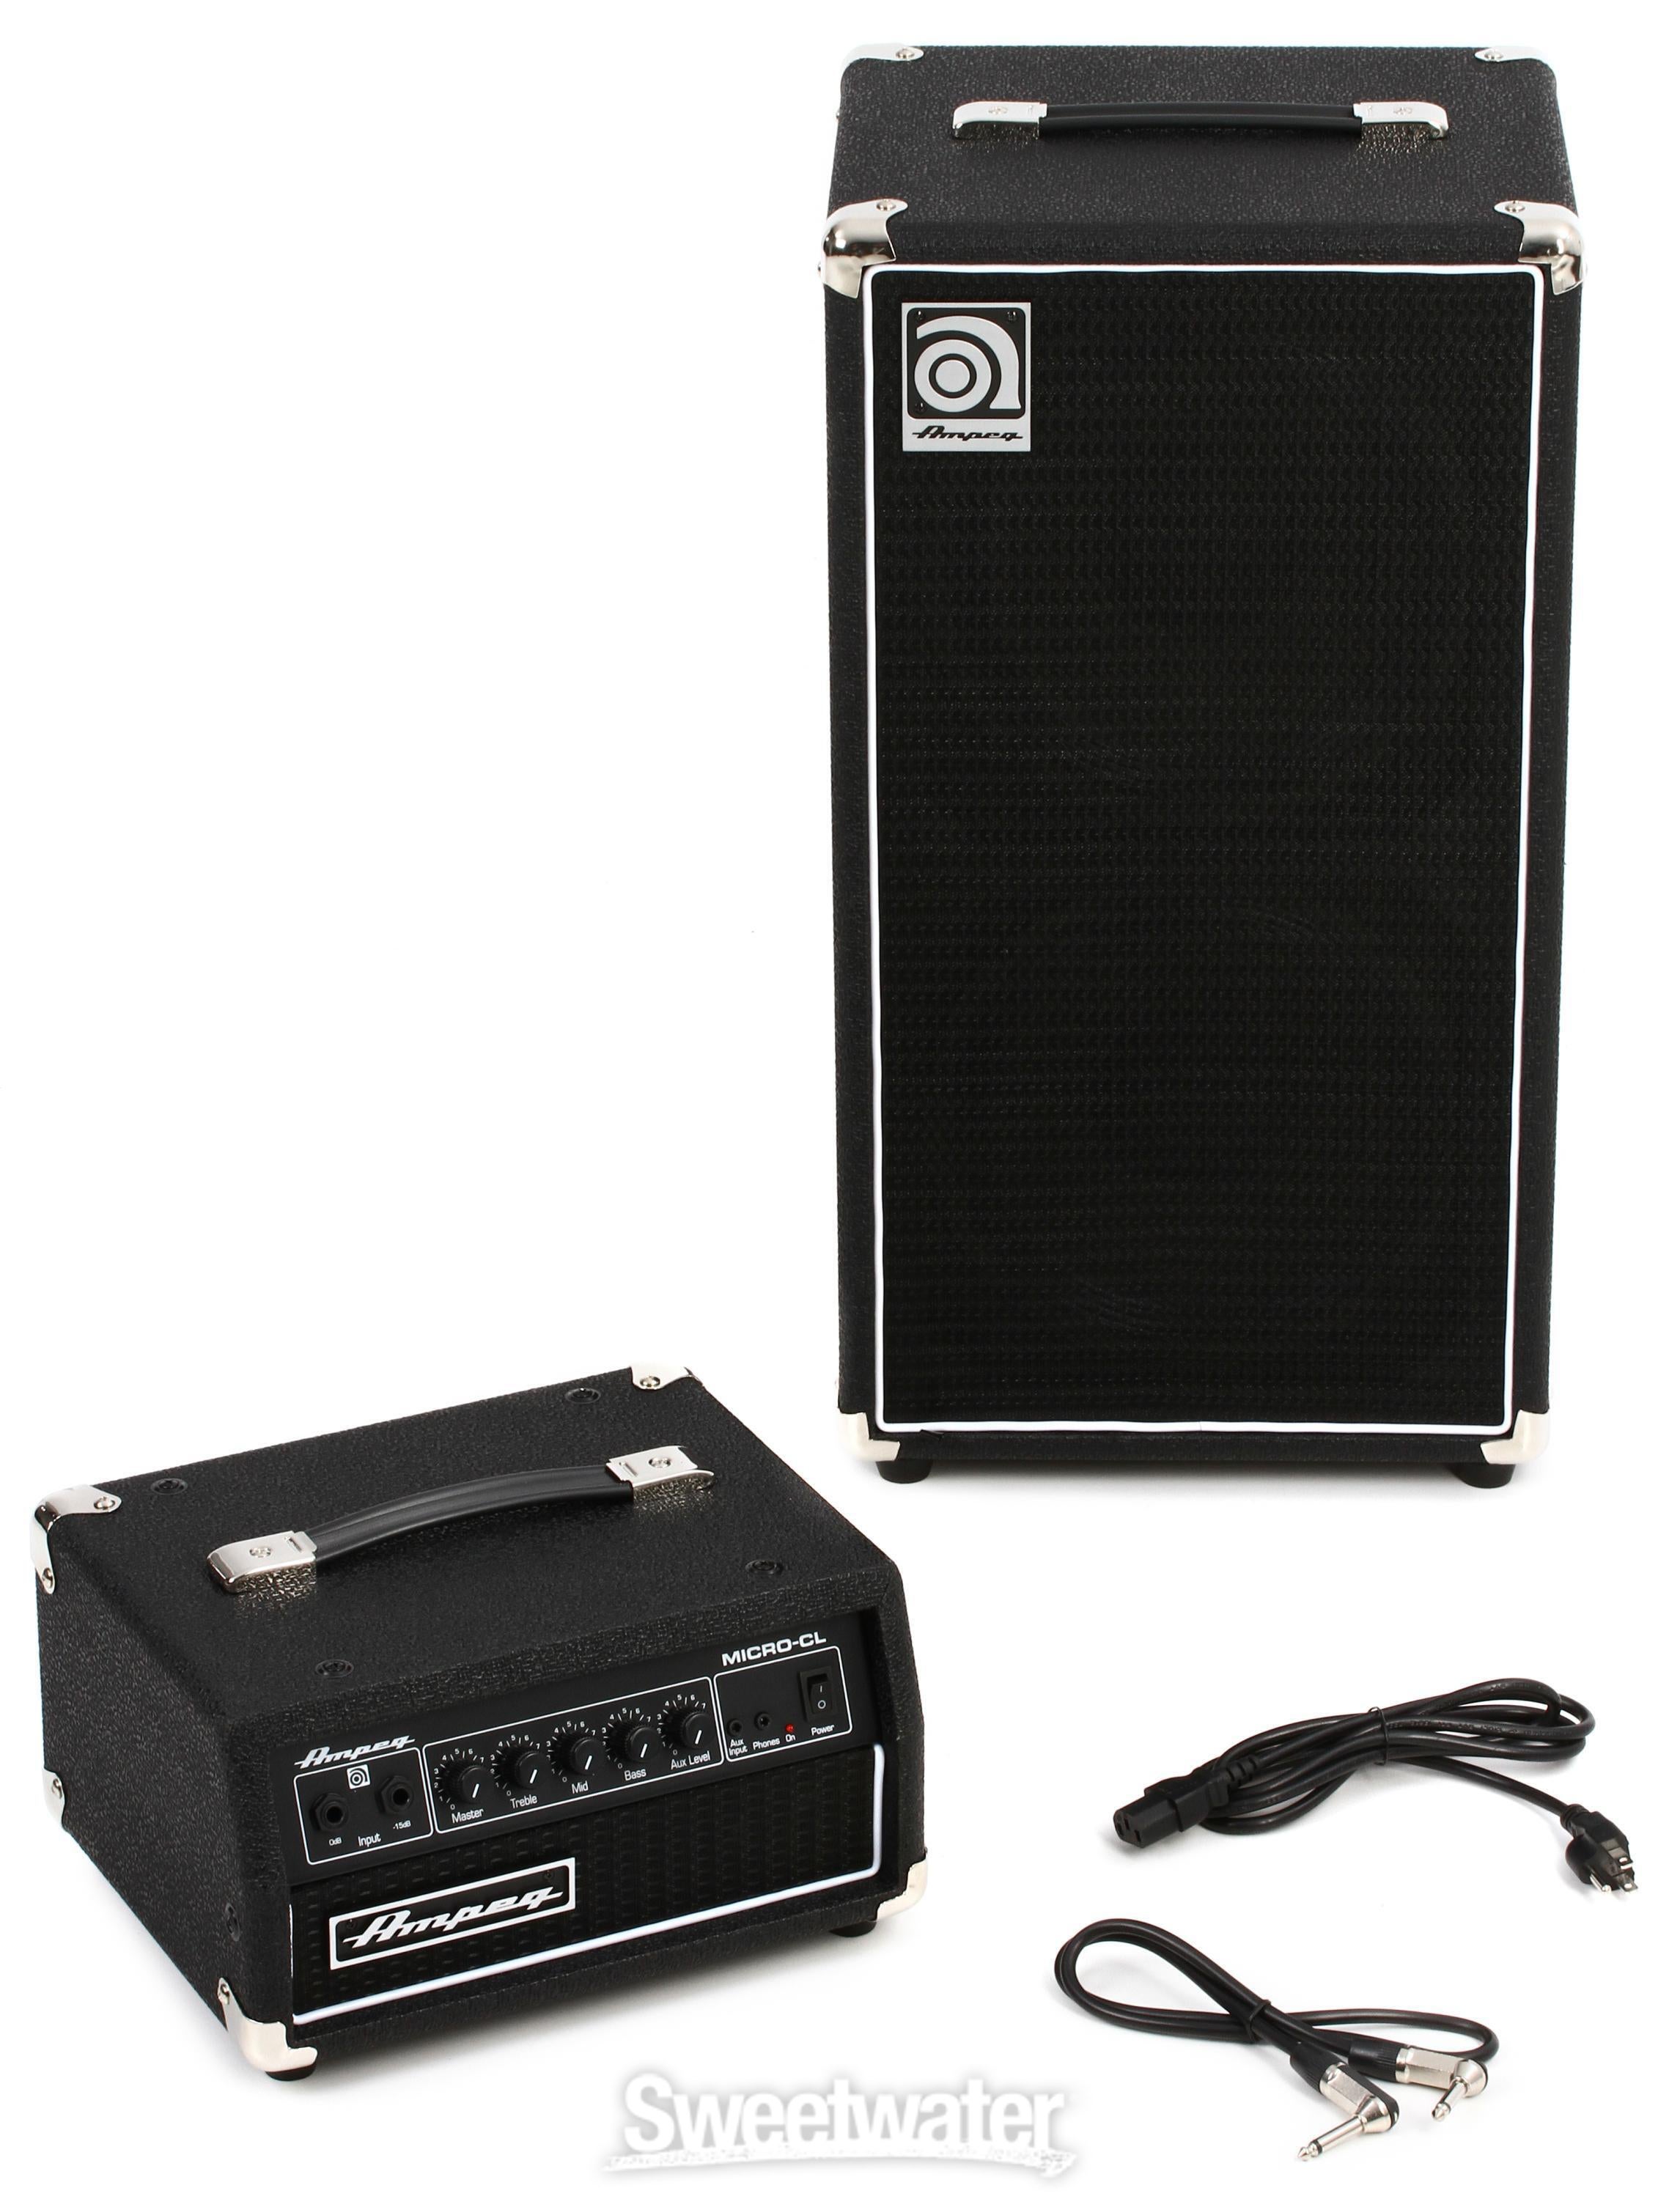 Ampeg Micro-CL 2 x 10-inch 100-watt Bass Stack | Sweetwater